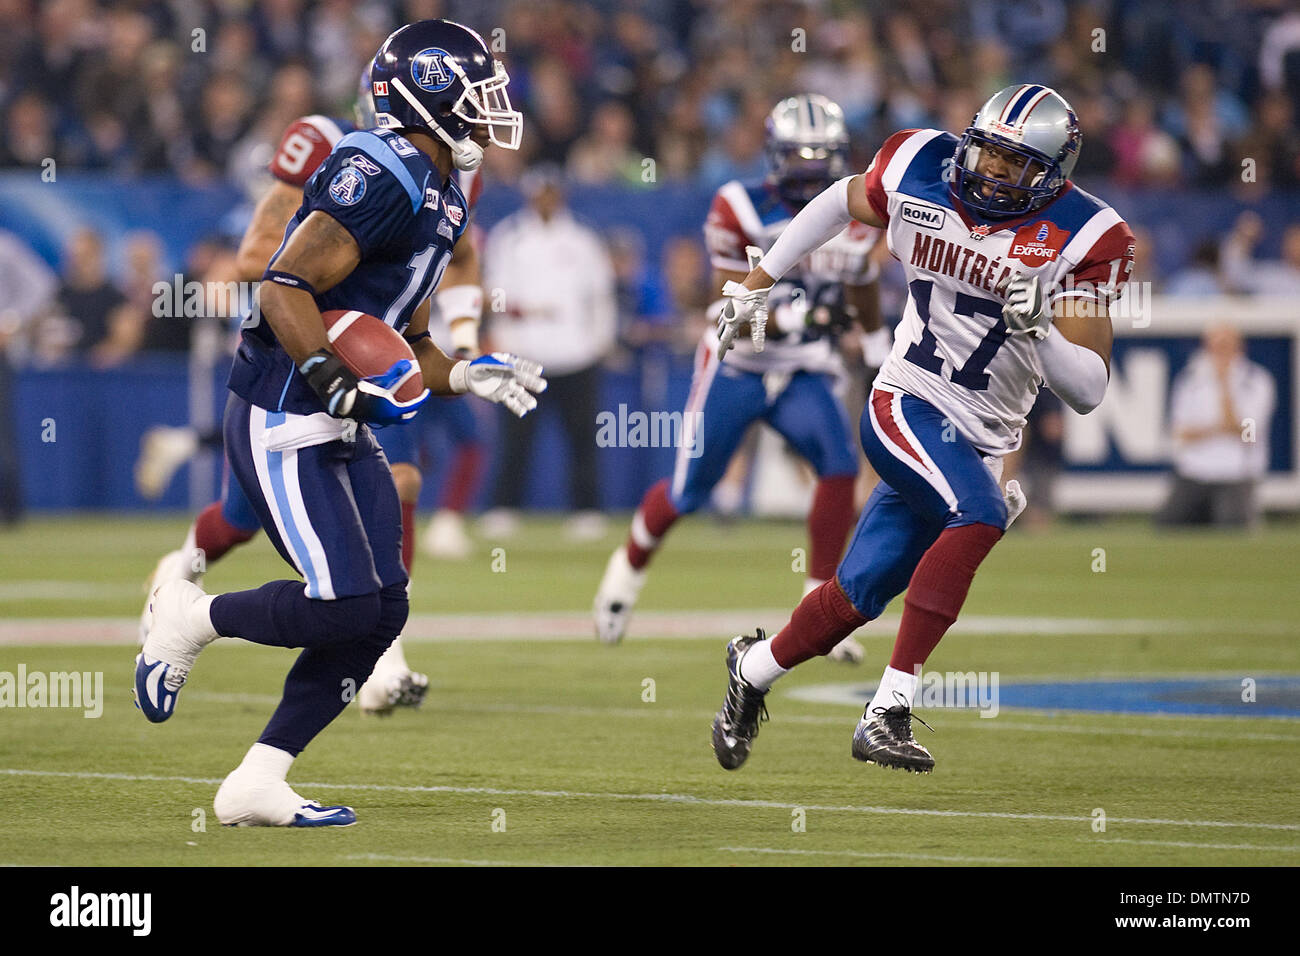 Toronto Argonauts wide receiver Jason Carter #19 runs with the ball as Montreal Alouettes defensive back Billy Parker #17 gives chase during a CFL game between the Toronto Argonauts and the Montreal Alouettes at the Rogers Centre in Toronto. (Credit Image: © Nick Turchiaro/Southcreek Global/ZUMApress.com) Stock Photo